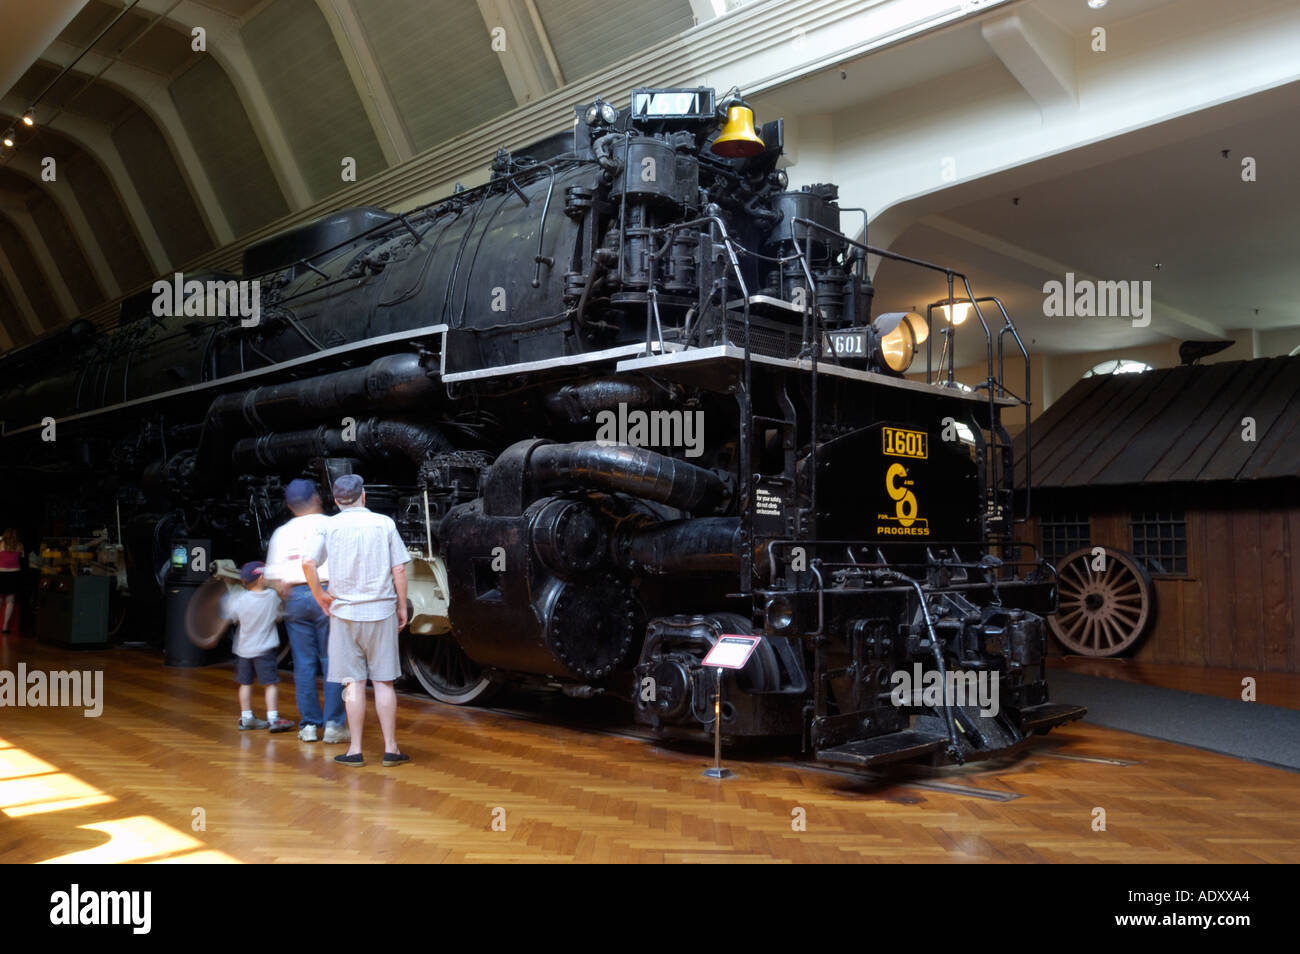 Allegheny steam Locomotive weighing 600 tons and built in 1941 on display at the Henry Ford Museum in Dearborn Michigan Stock Photo